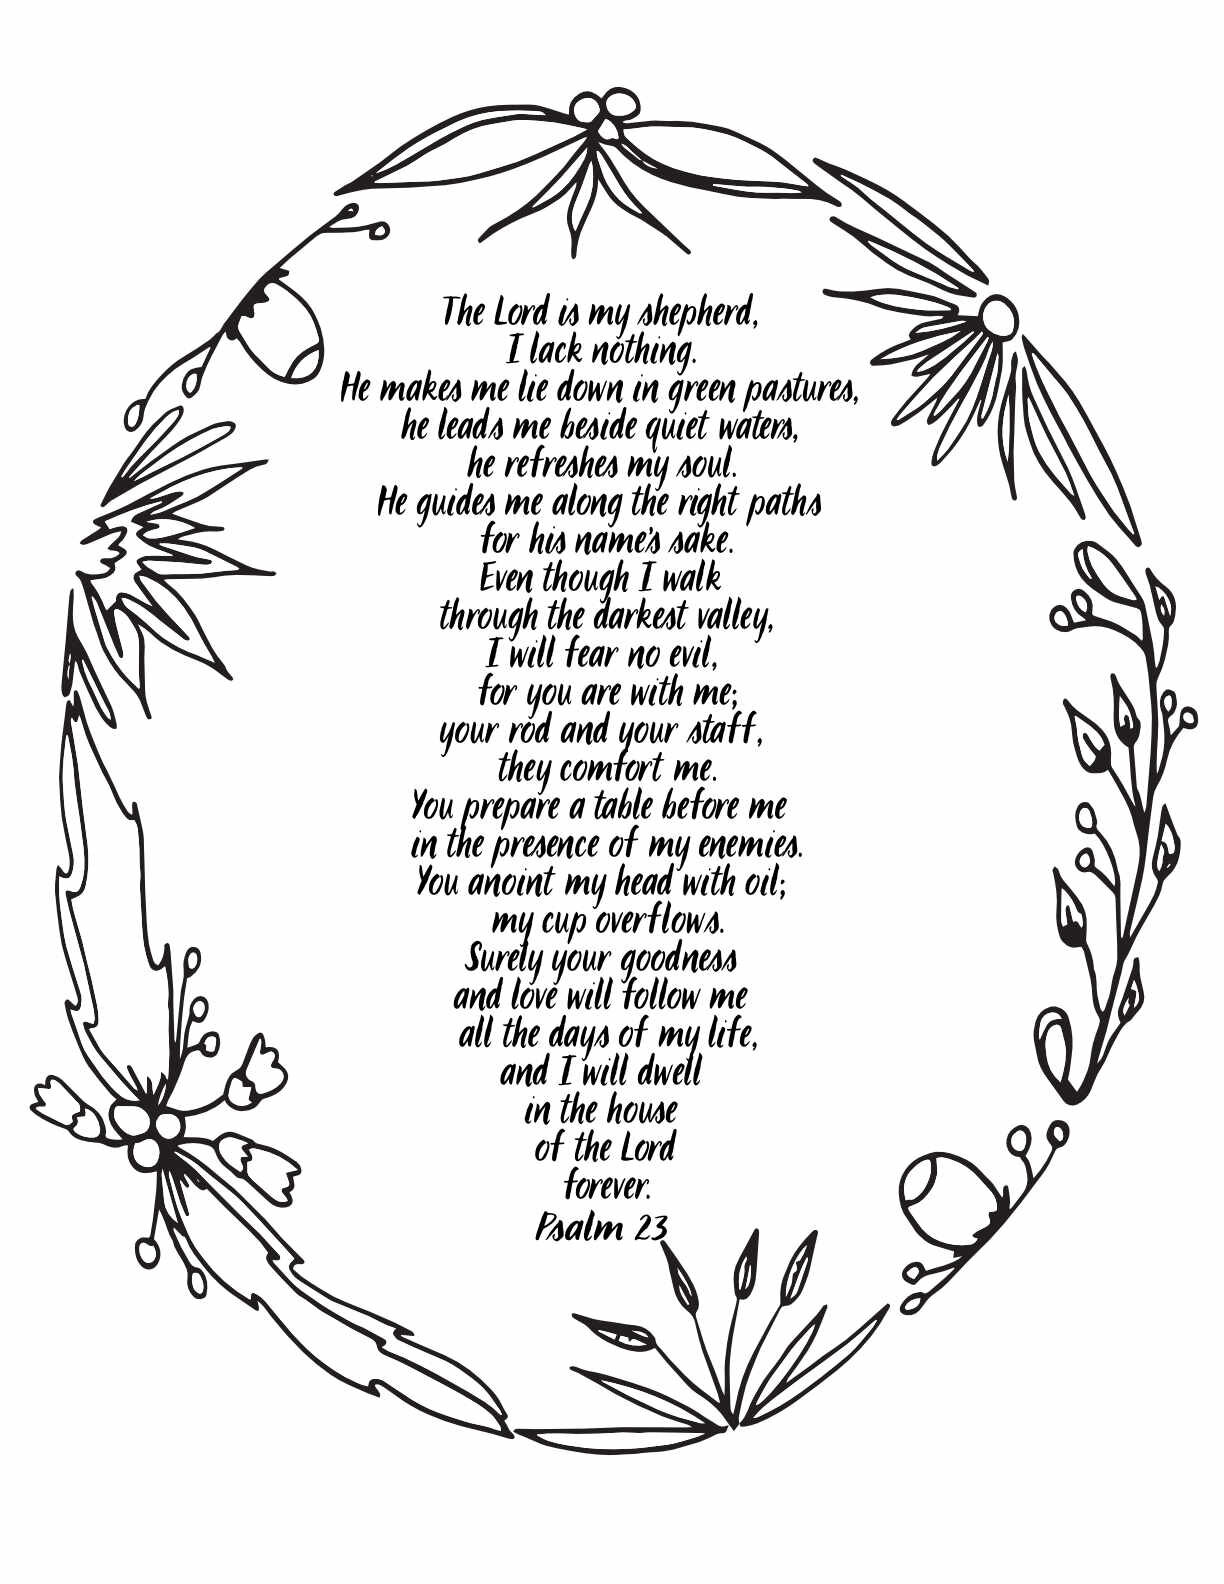 10 Free Printable Psalm Coloring Pages - Download and Color Adult Scripture - Psalm 23CLICK HERE TO DOWNLOAD THIS PAGE FREE